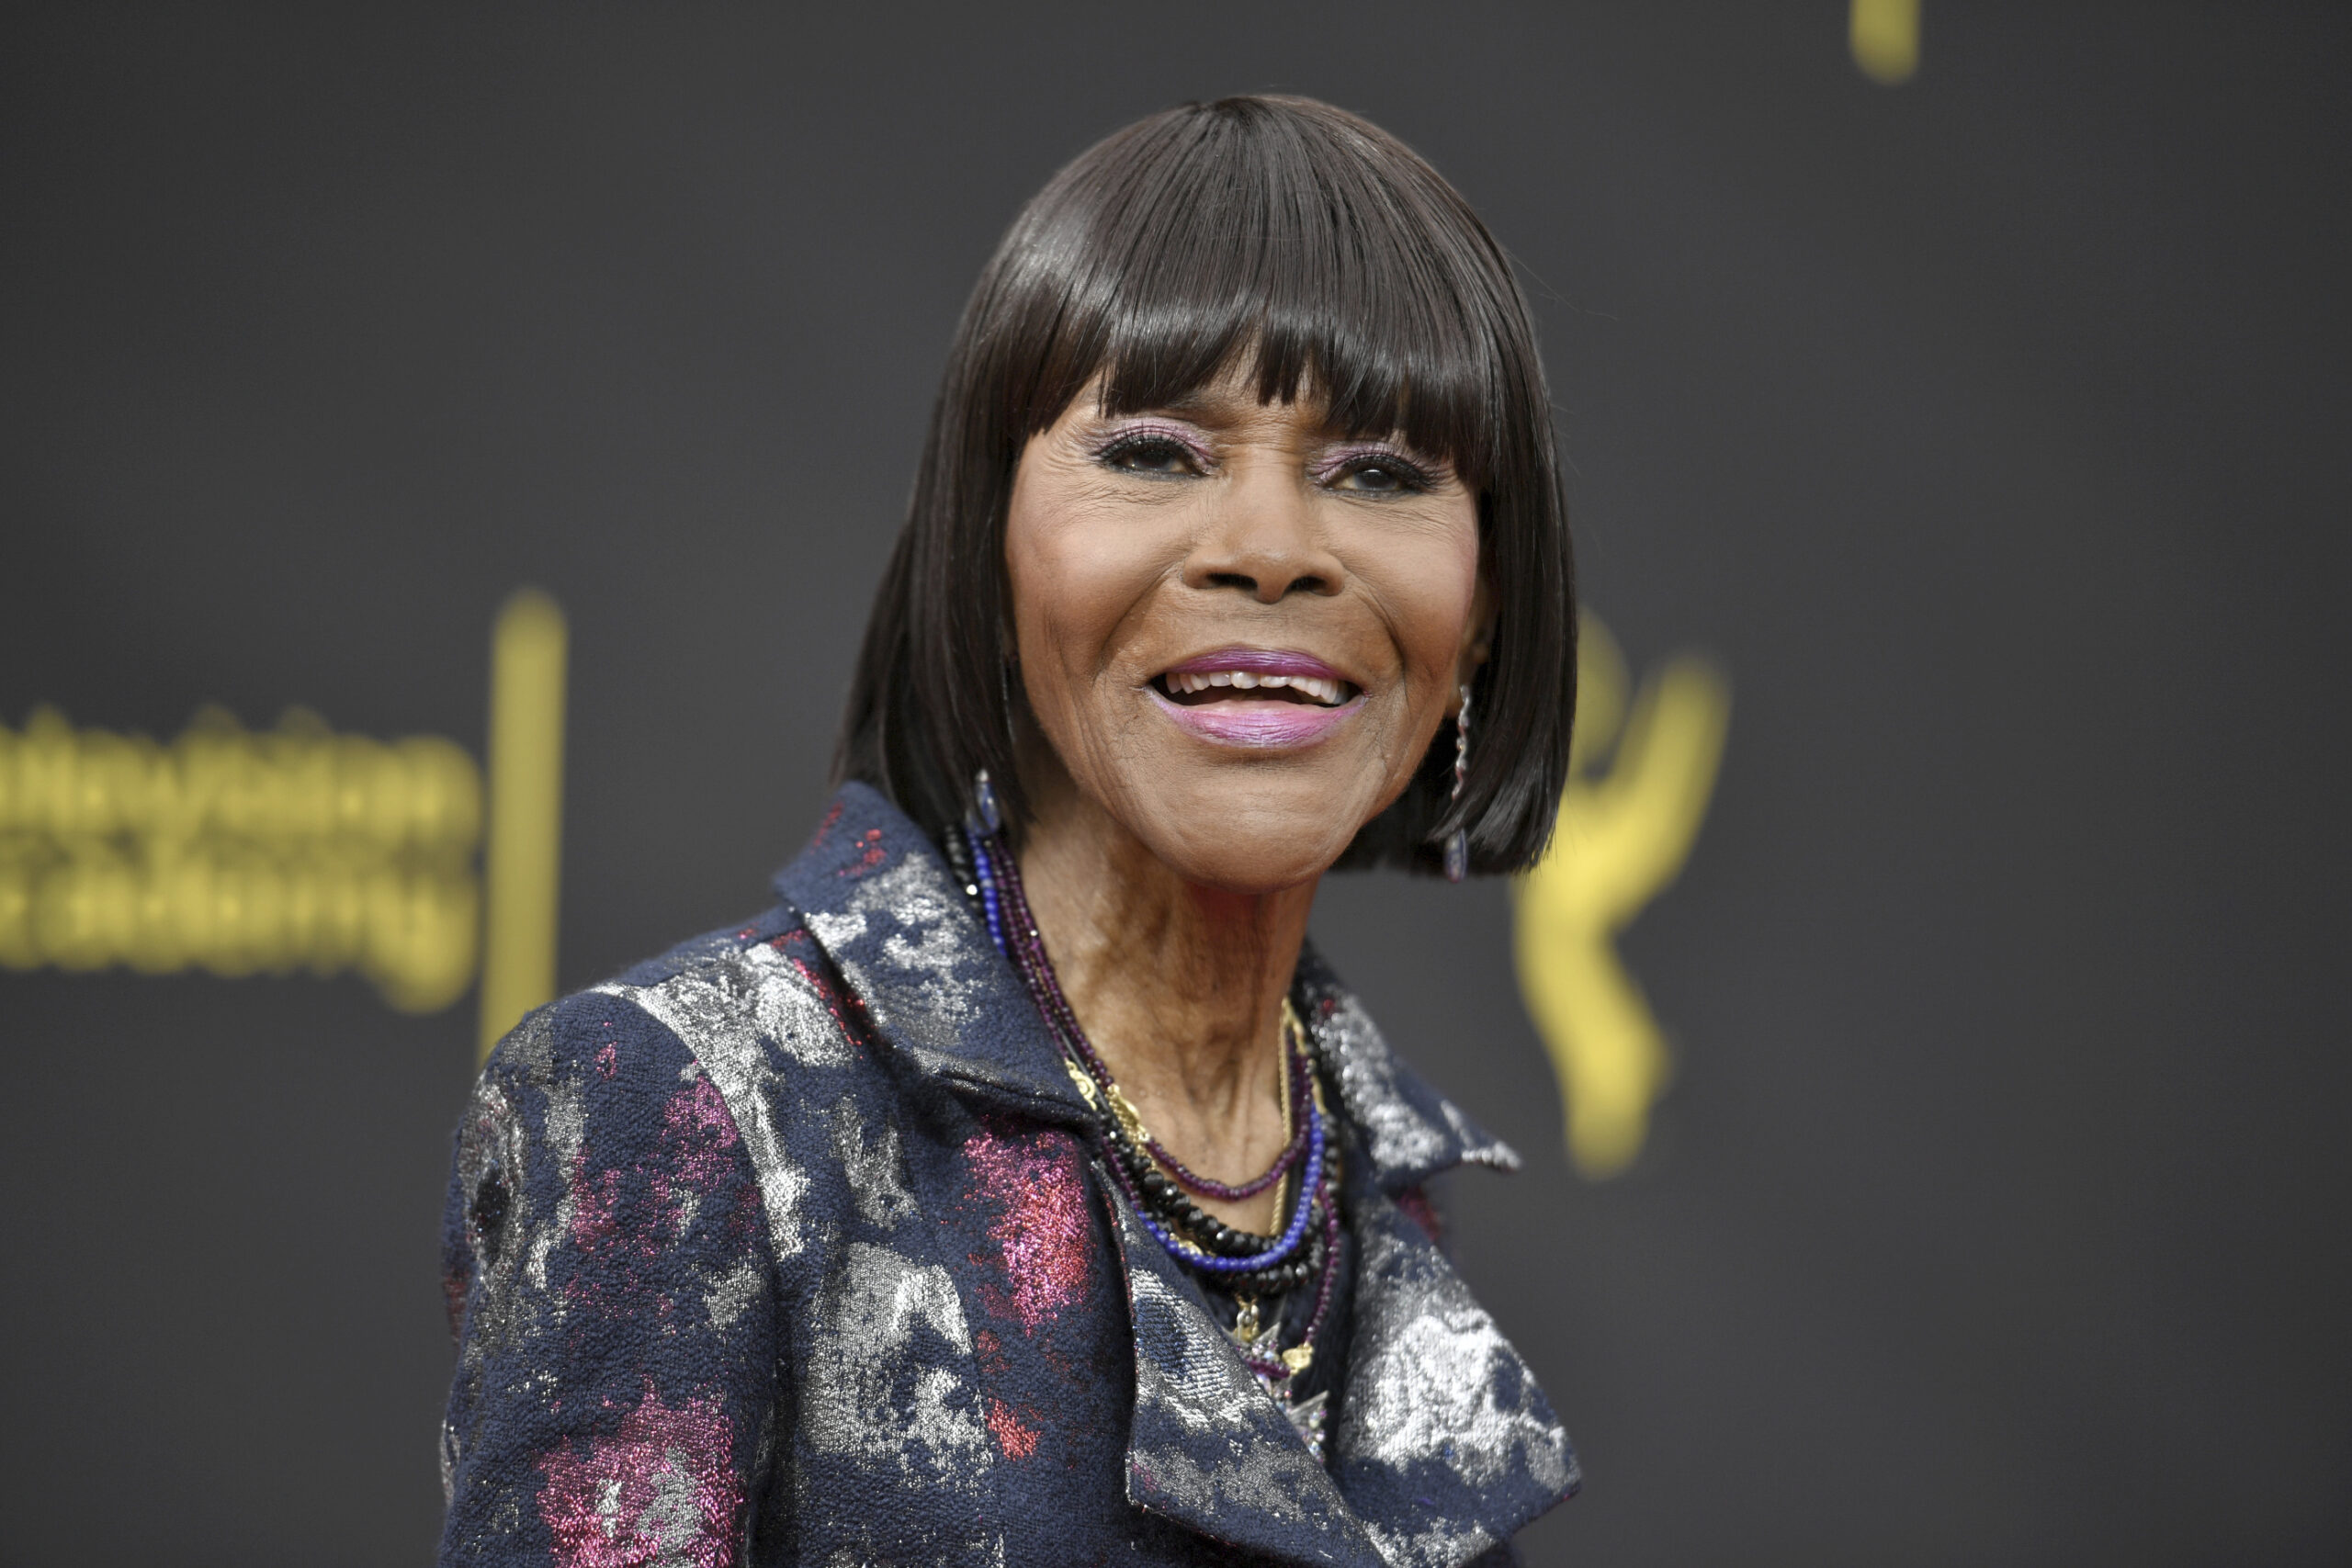 FILE - Cicely Tyson arrives at night two of the Creative Arts Emmy Awards on Sept. 15, 2019, in Los Angeles. Tyson, the pioneering Black actress who gained an Oscar nomination for her role as the sharecropper’s wife in “Sounder,” a Tony Award in 2013 at age 88 and touched TV viewers’ hearts in “The Autobiography of Miss Jane Pittman,” has died. She was 96. Tyson's death was announced by her family, via her manager Larry Thompson, who did not immediately provide additional details. (Photo by Richard Shotwell/Invision/AP, File)